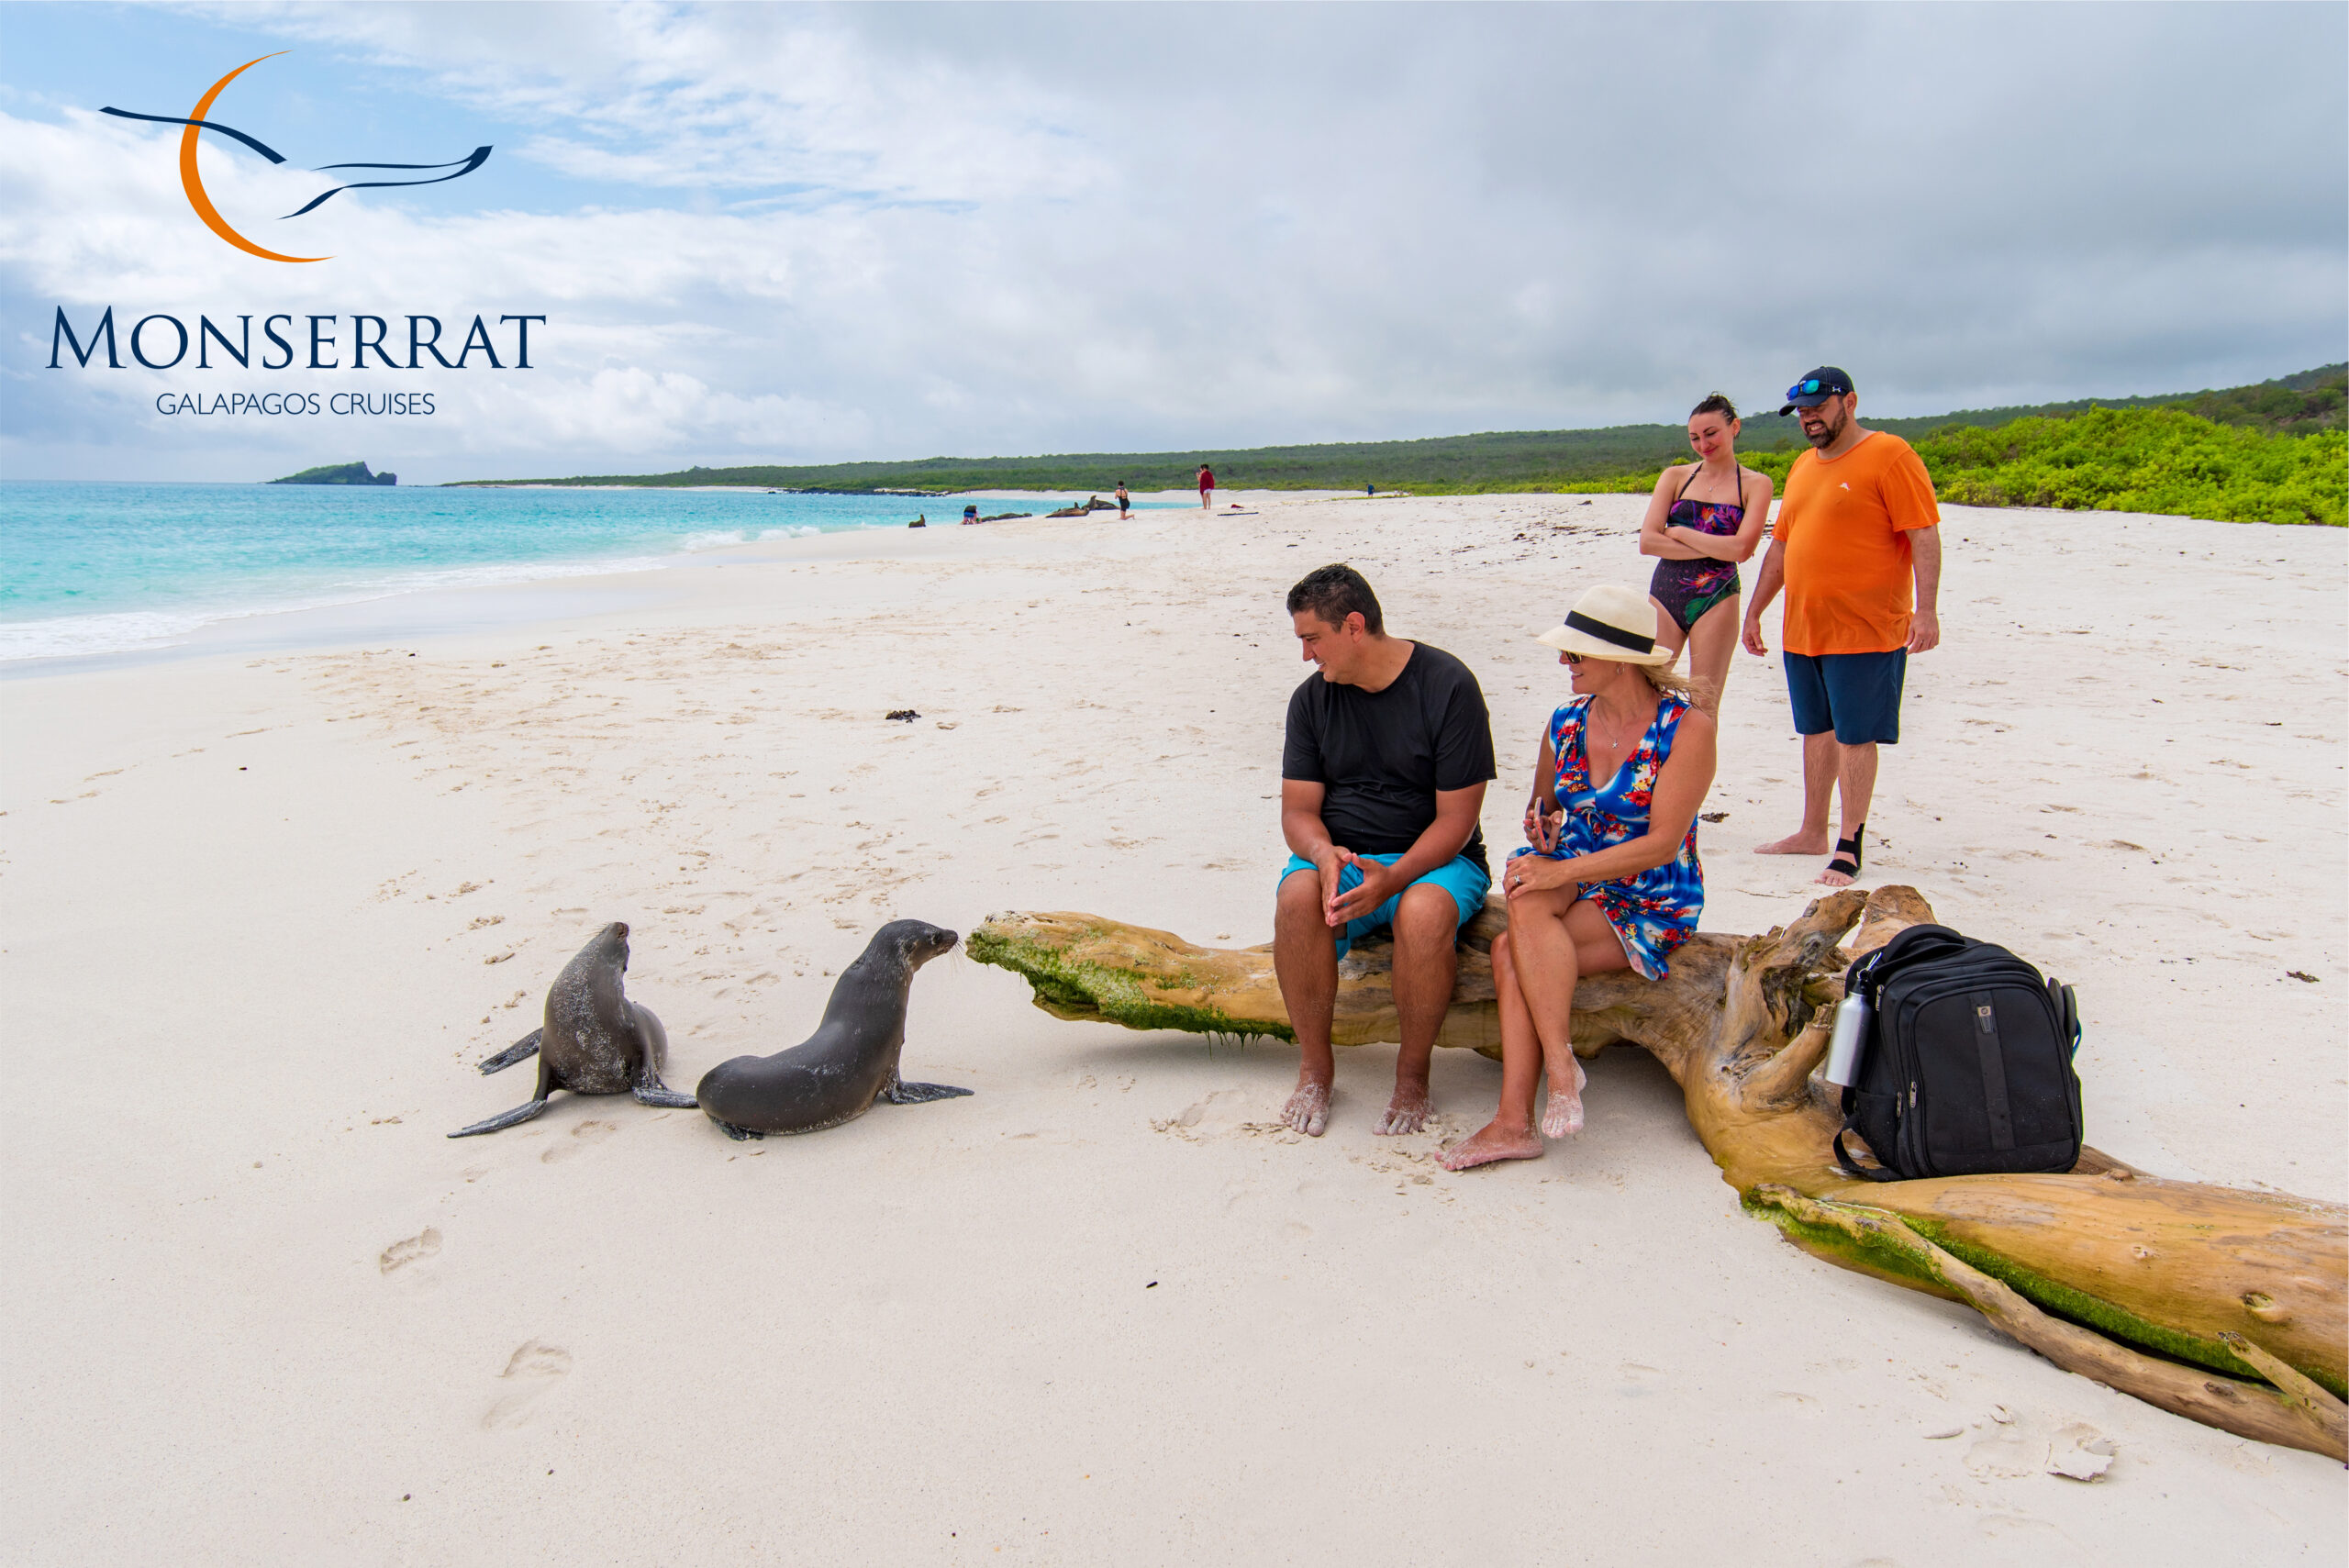 Monserrat Galapagos Cruises Guest Experience 12 High Res scaled